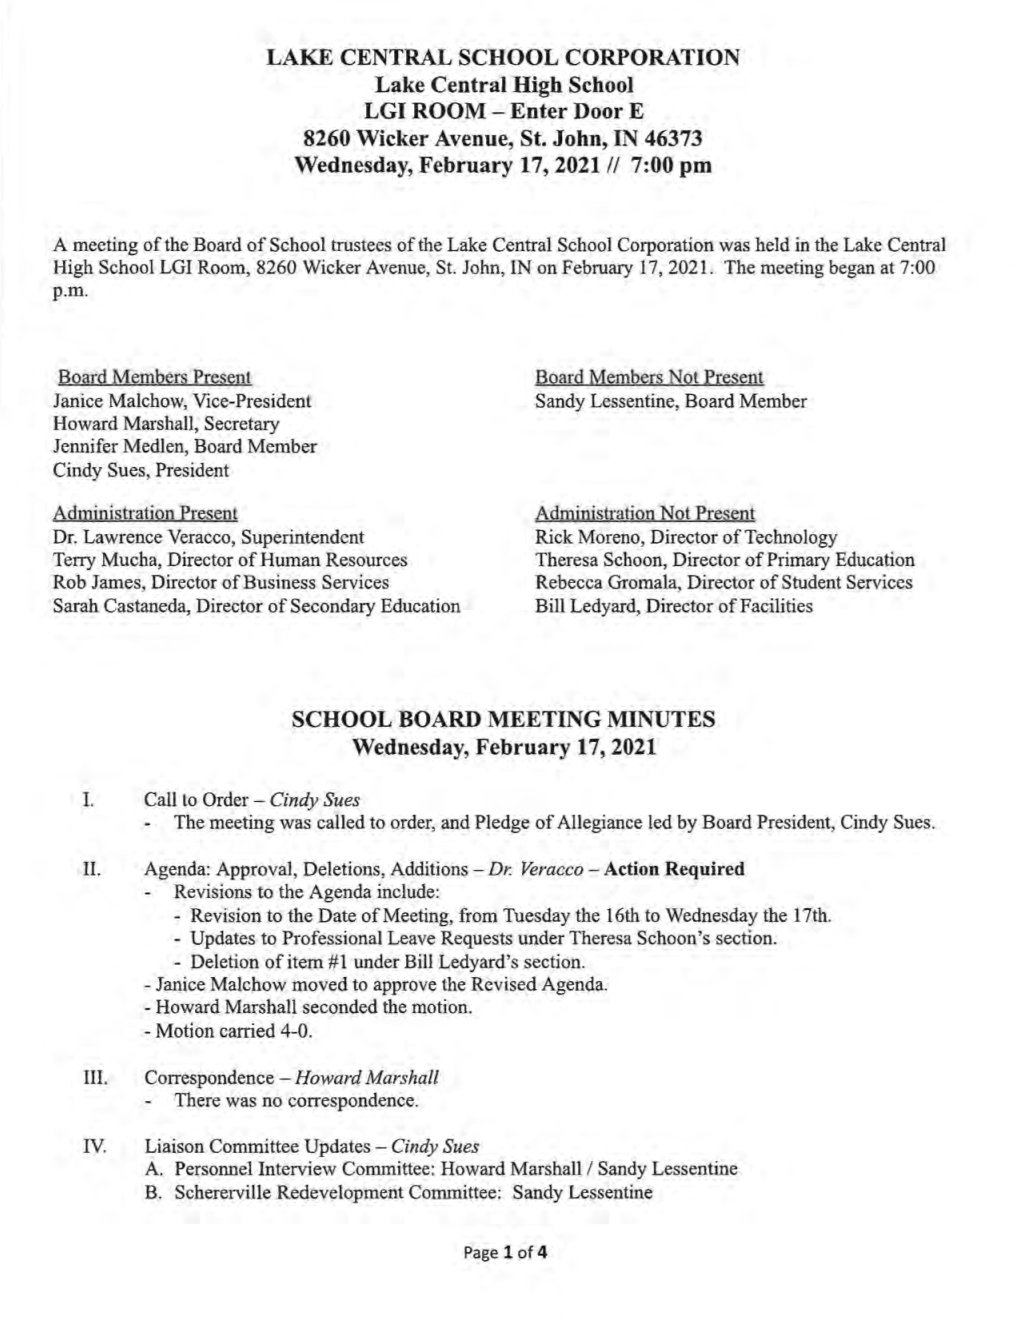 LCSC Board Meeting Minutes 2-17-21